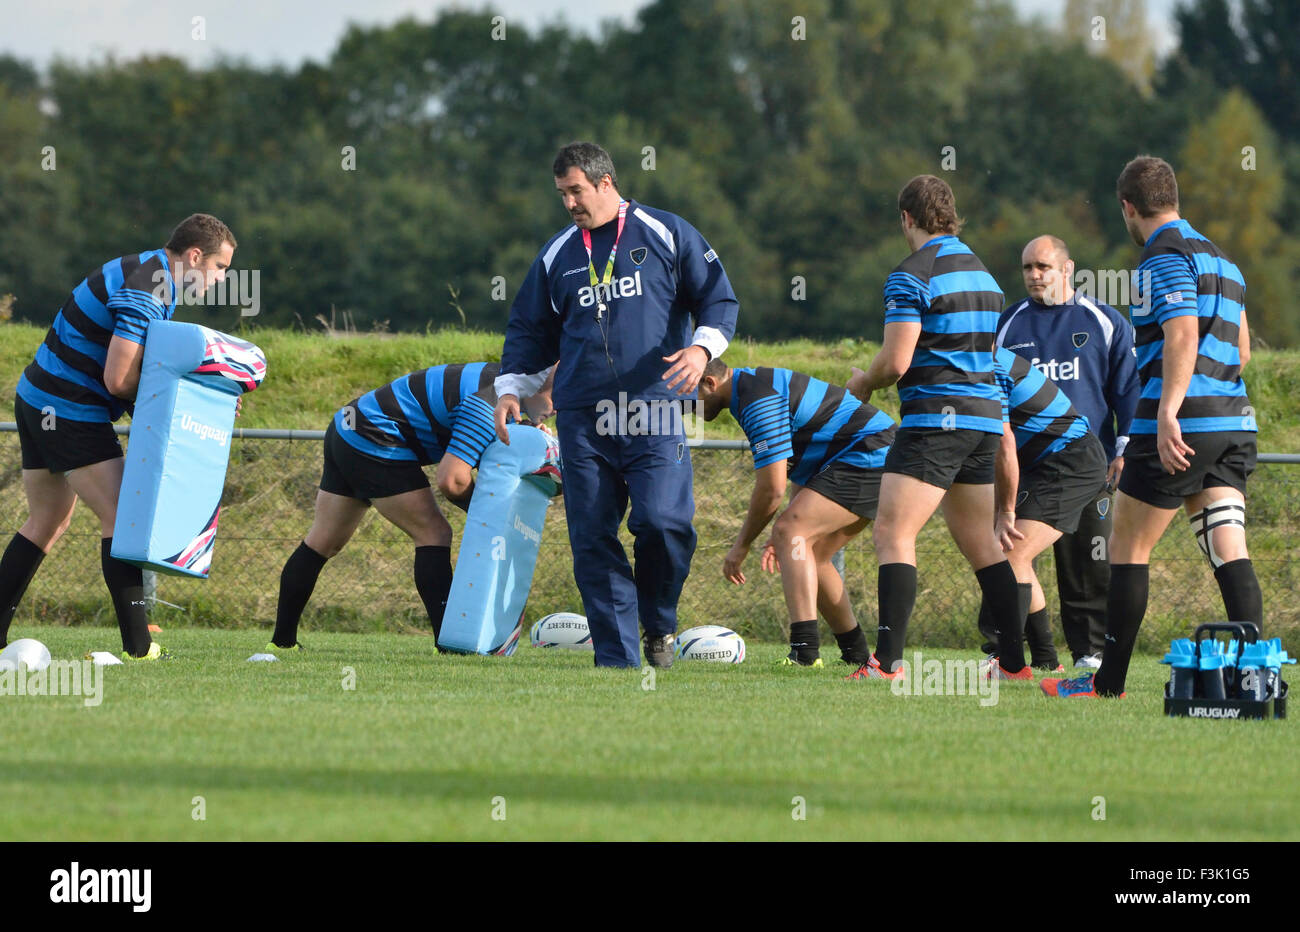 Manchester, UK. 8th October, 2015. The Uruguay squad train at Broughton Park Rugby Club in preparation for their match against England on 10th October with neither side able to qualify for the quarter-finals. Rugby World Cup - Uruguay Training Session Manchester UK Credit:  John Fryer/Alamy Live News Stock Photo